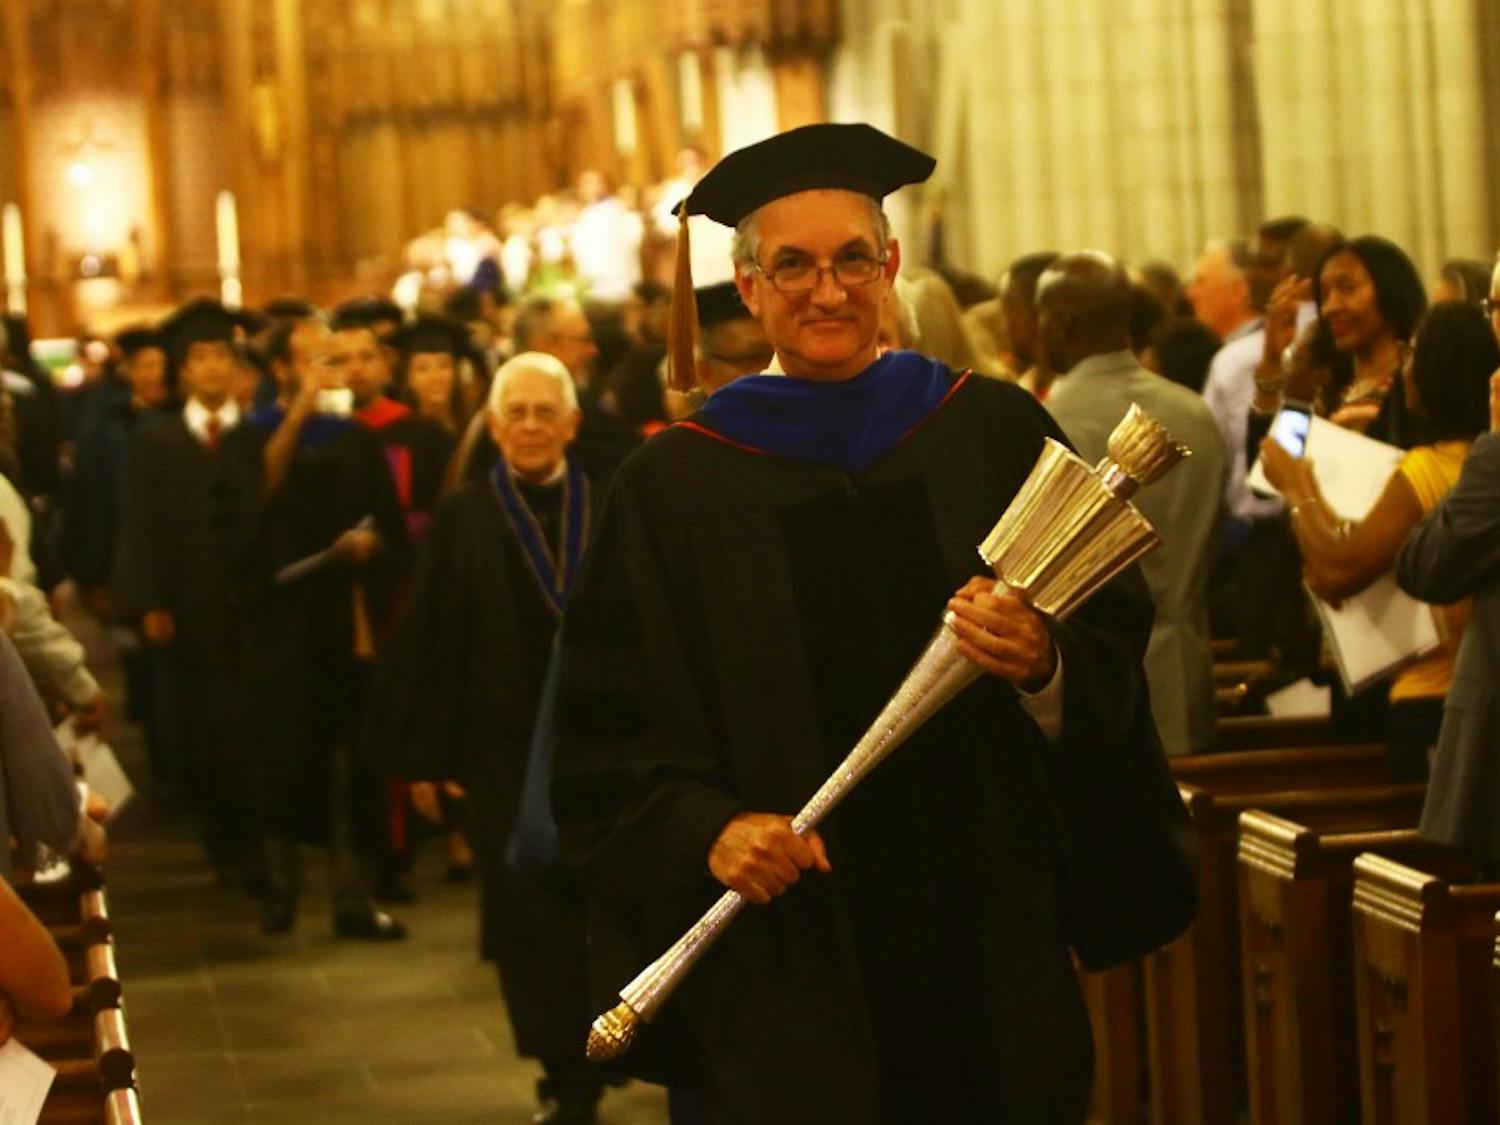 Joshua Socolar, chair of Academic Council, walks away from the alter after the Founders' Day convocation.